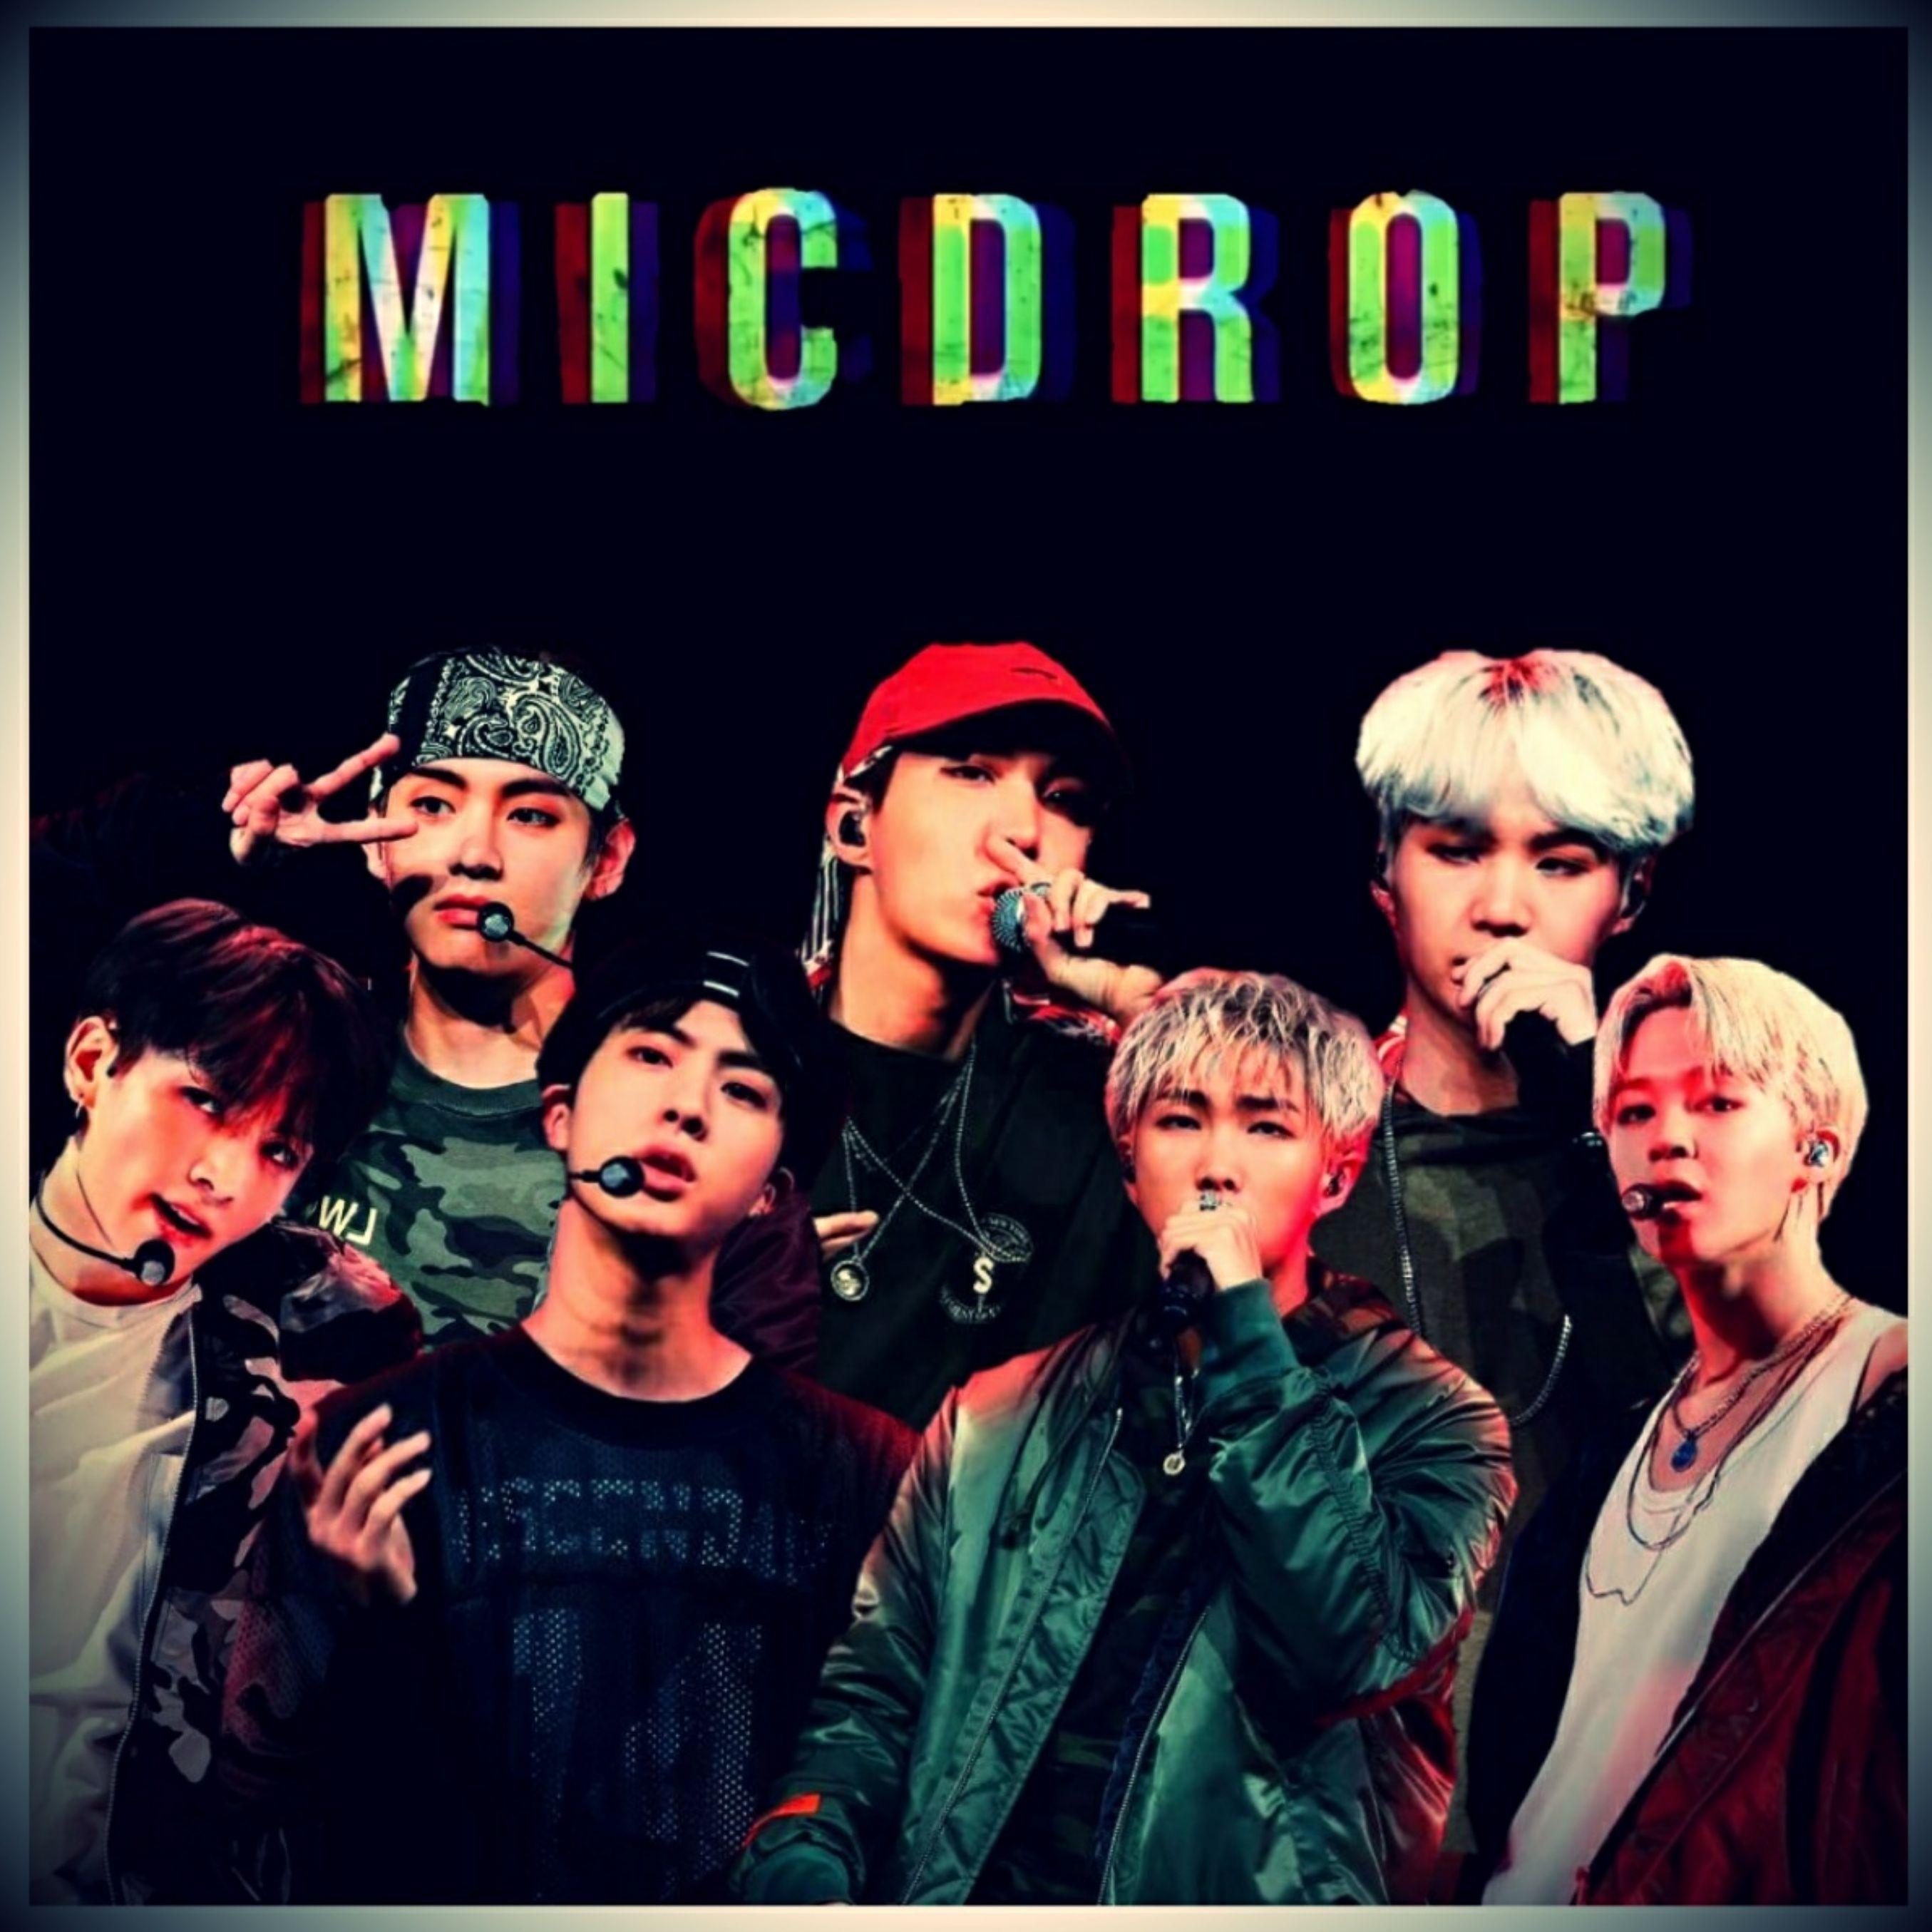 mic drop meaning bts